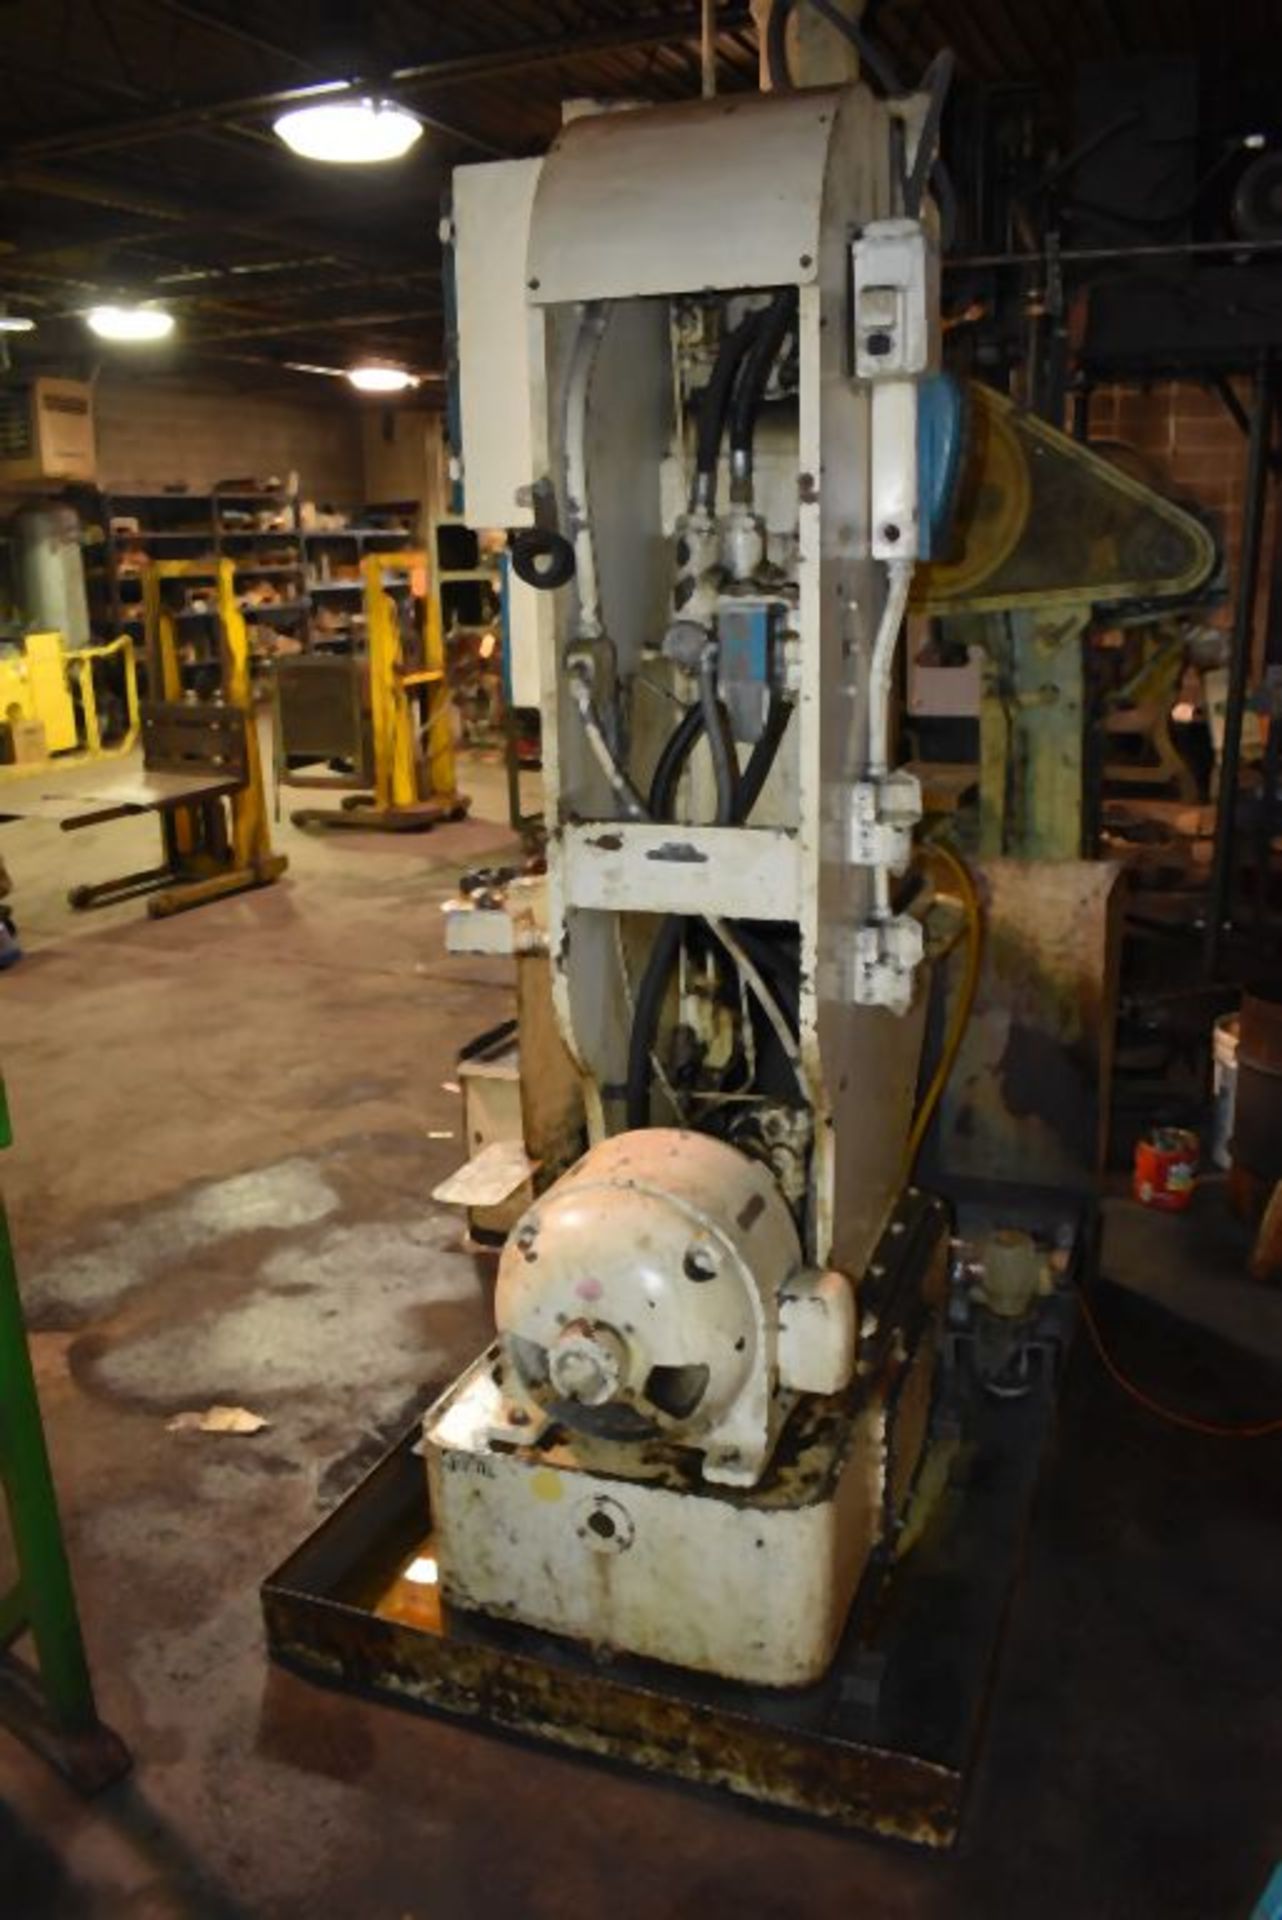 HANNIFIN HYDRAULIC PRESS, DUAL PALM BUTTONS, 12" STR., 7.5 H.P. MOTOR - Image 3 of 4